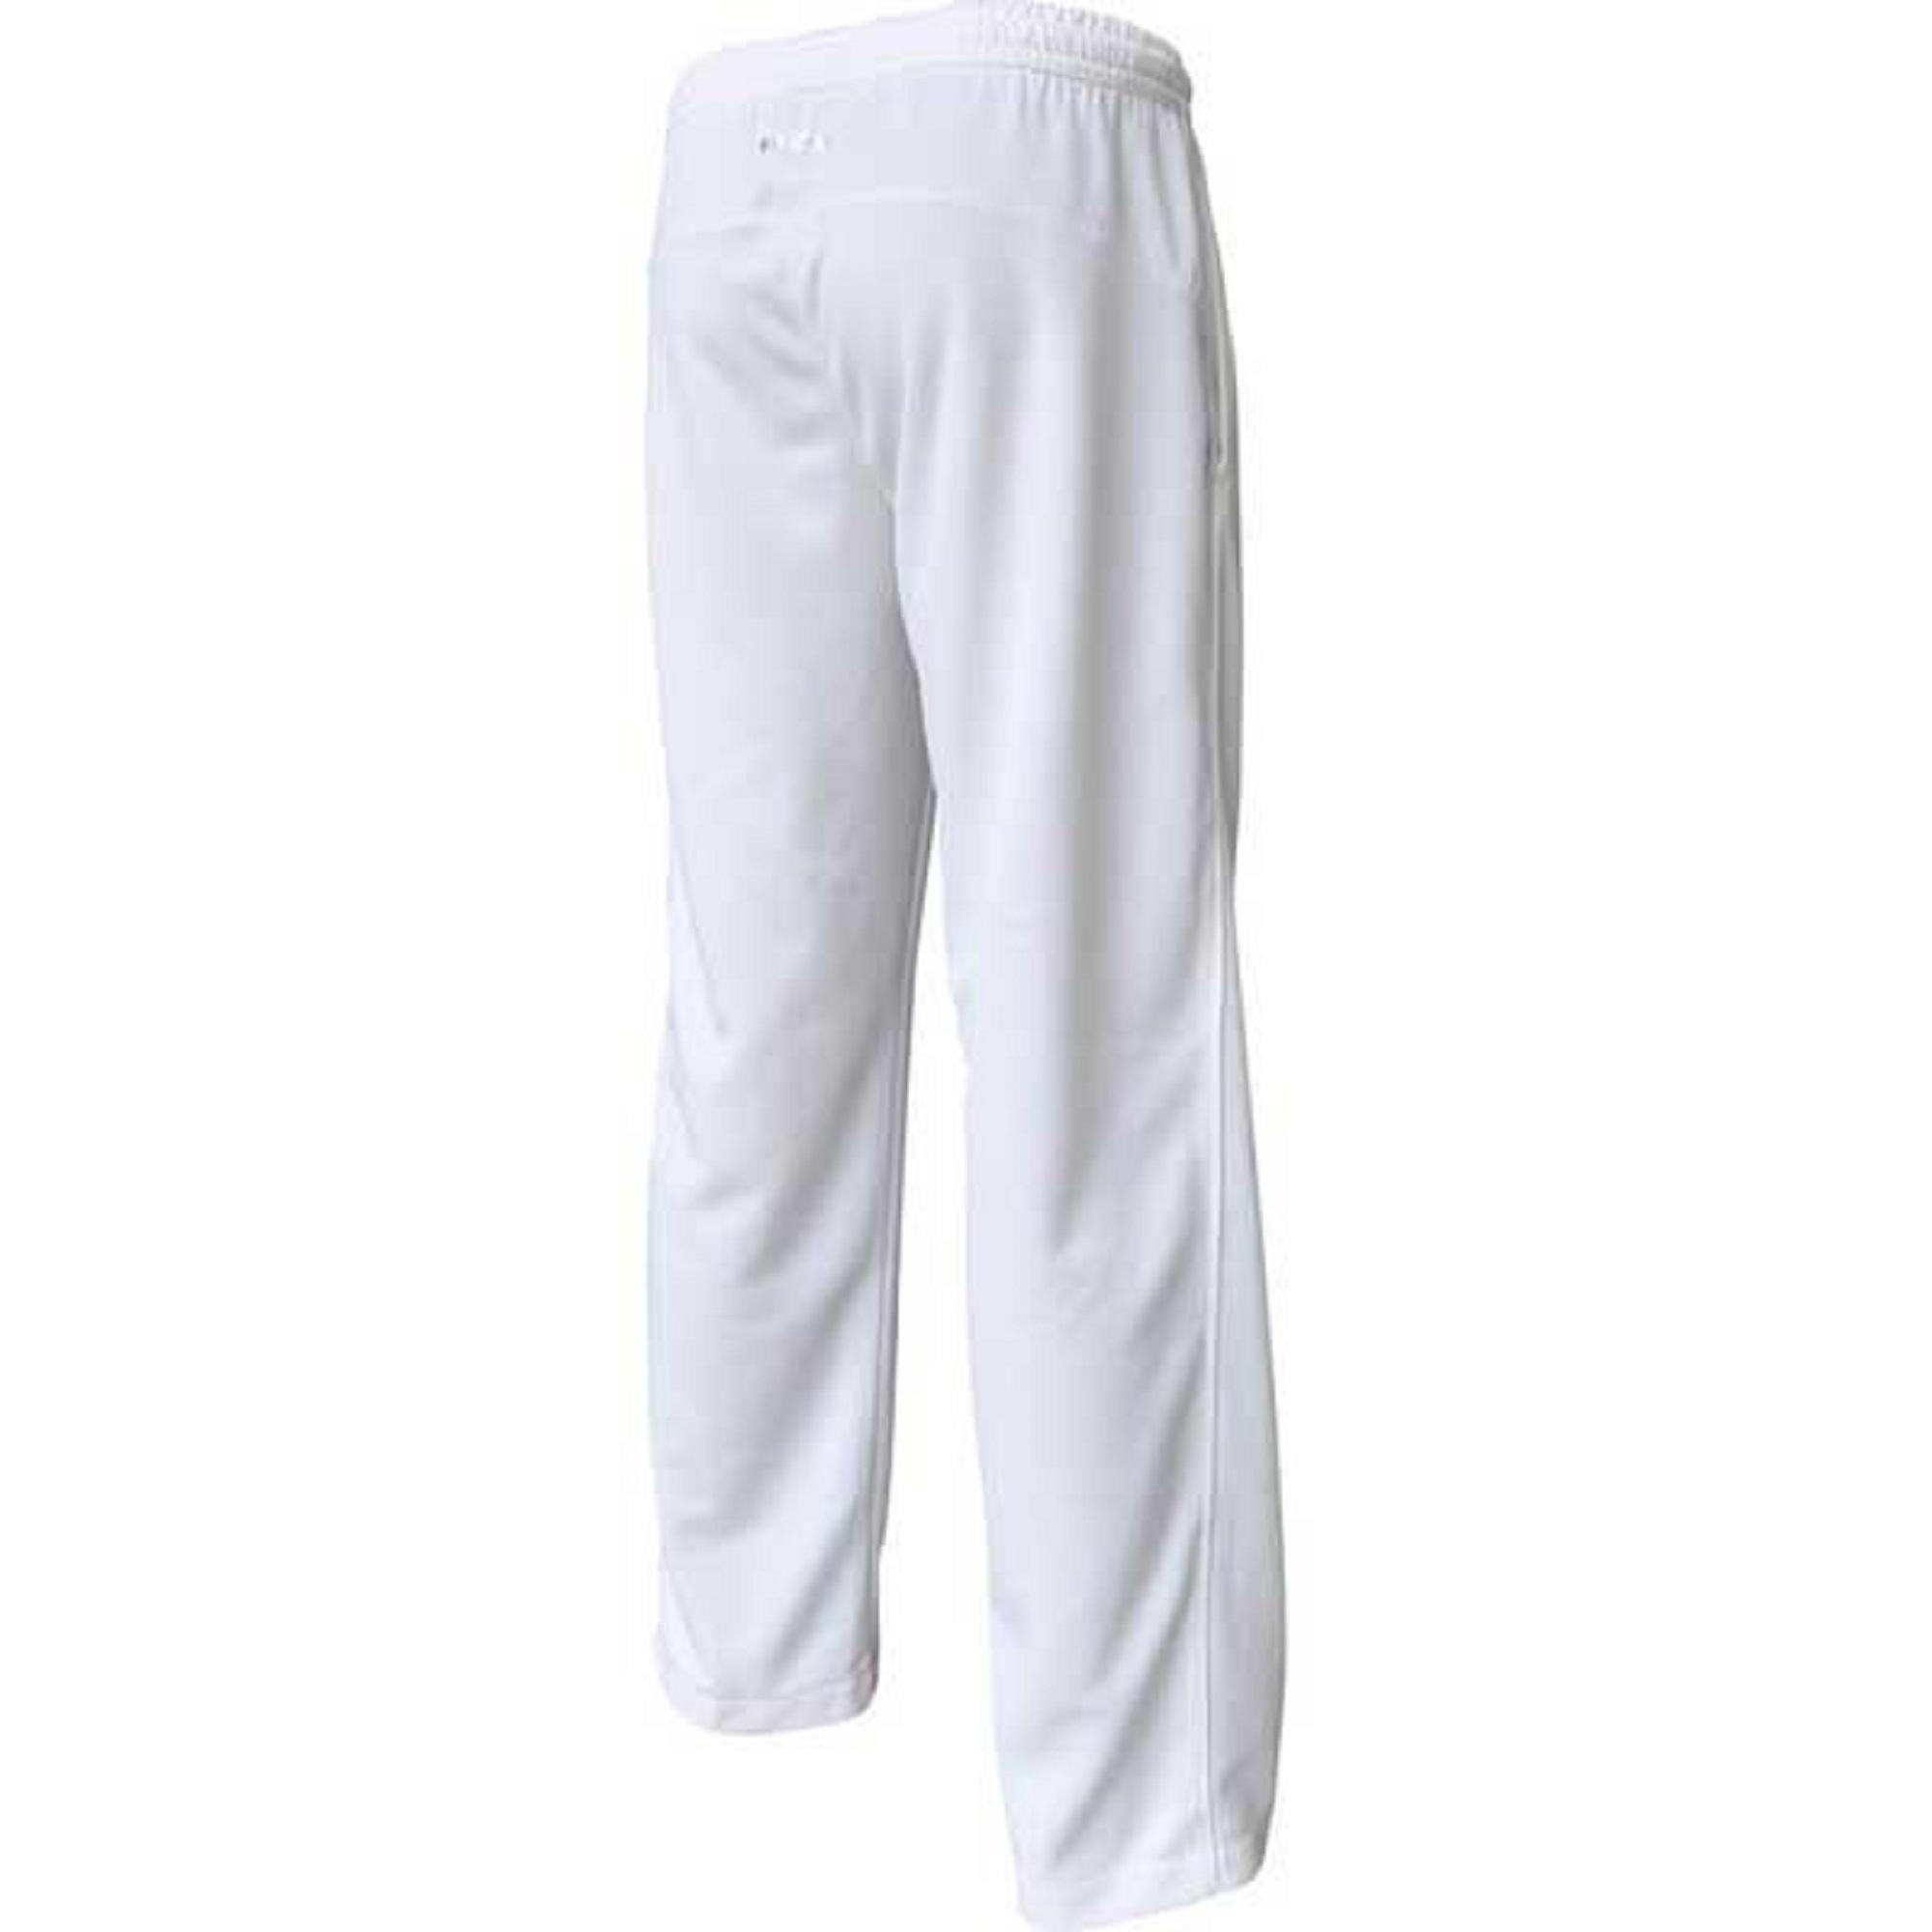 Pro Player Kids cricket trousers 2/3